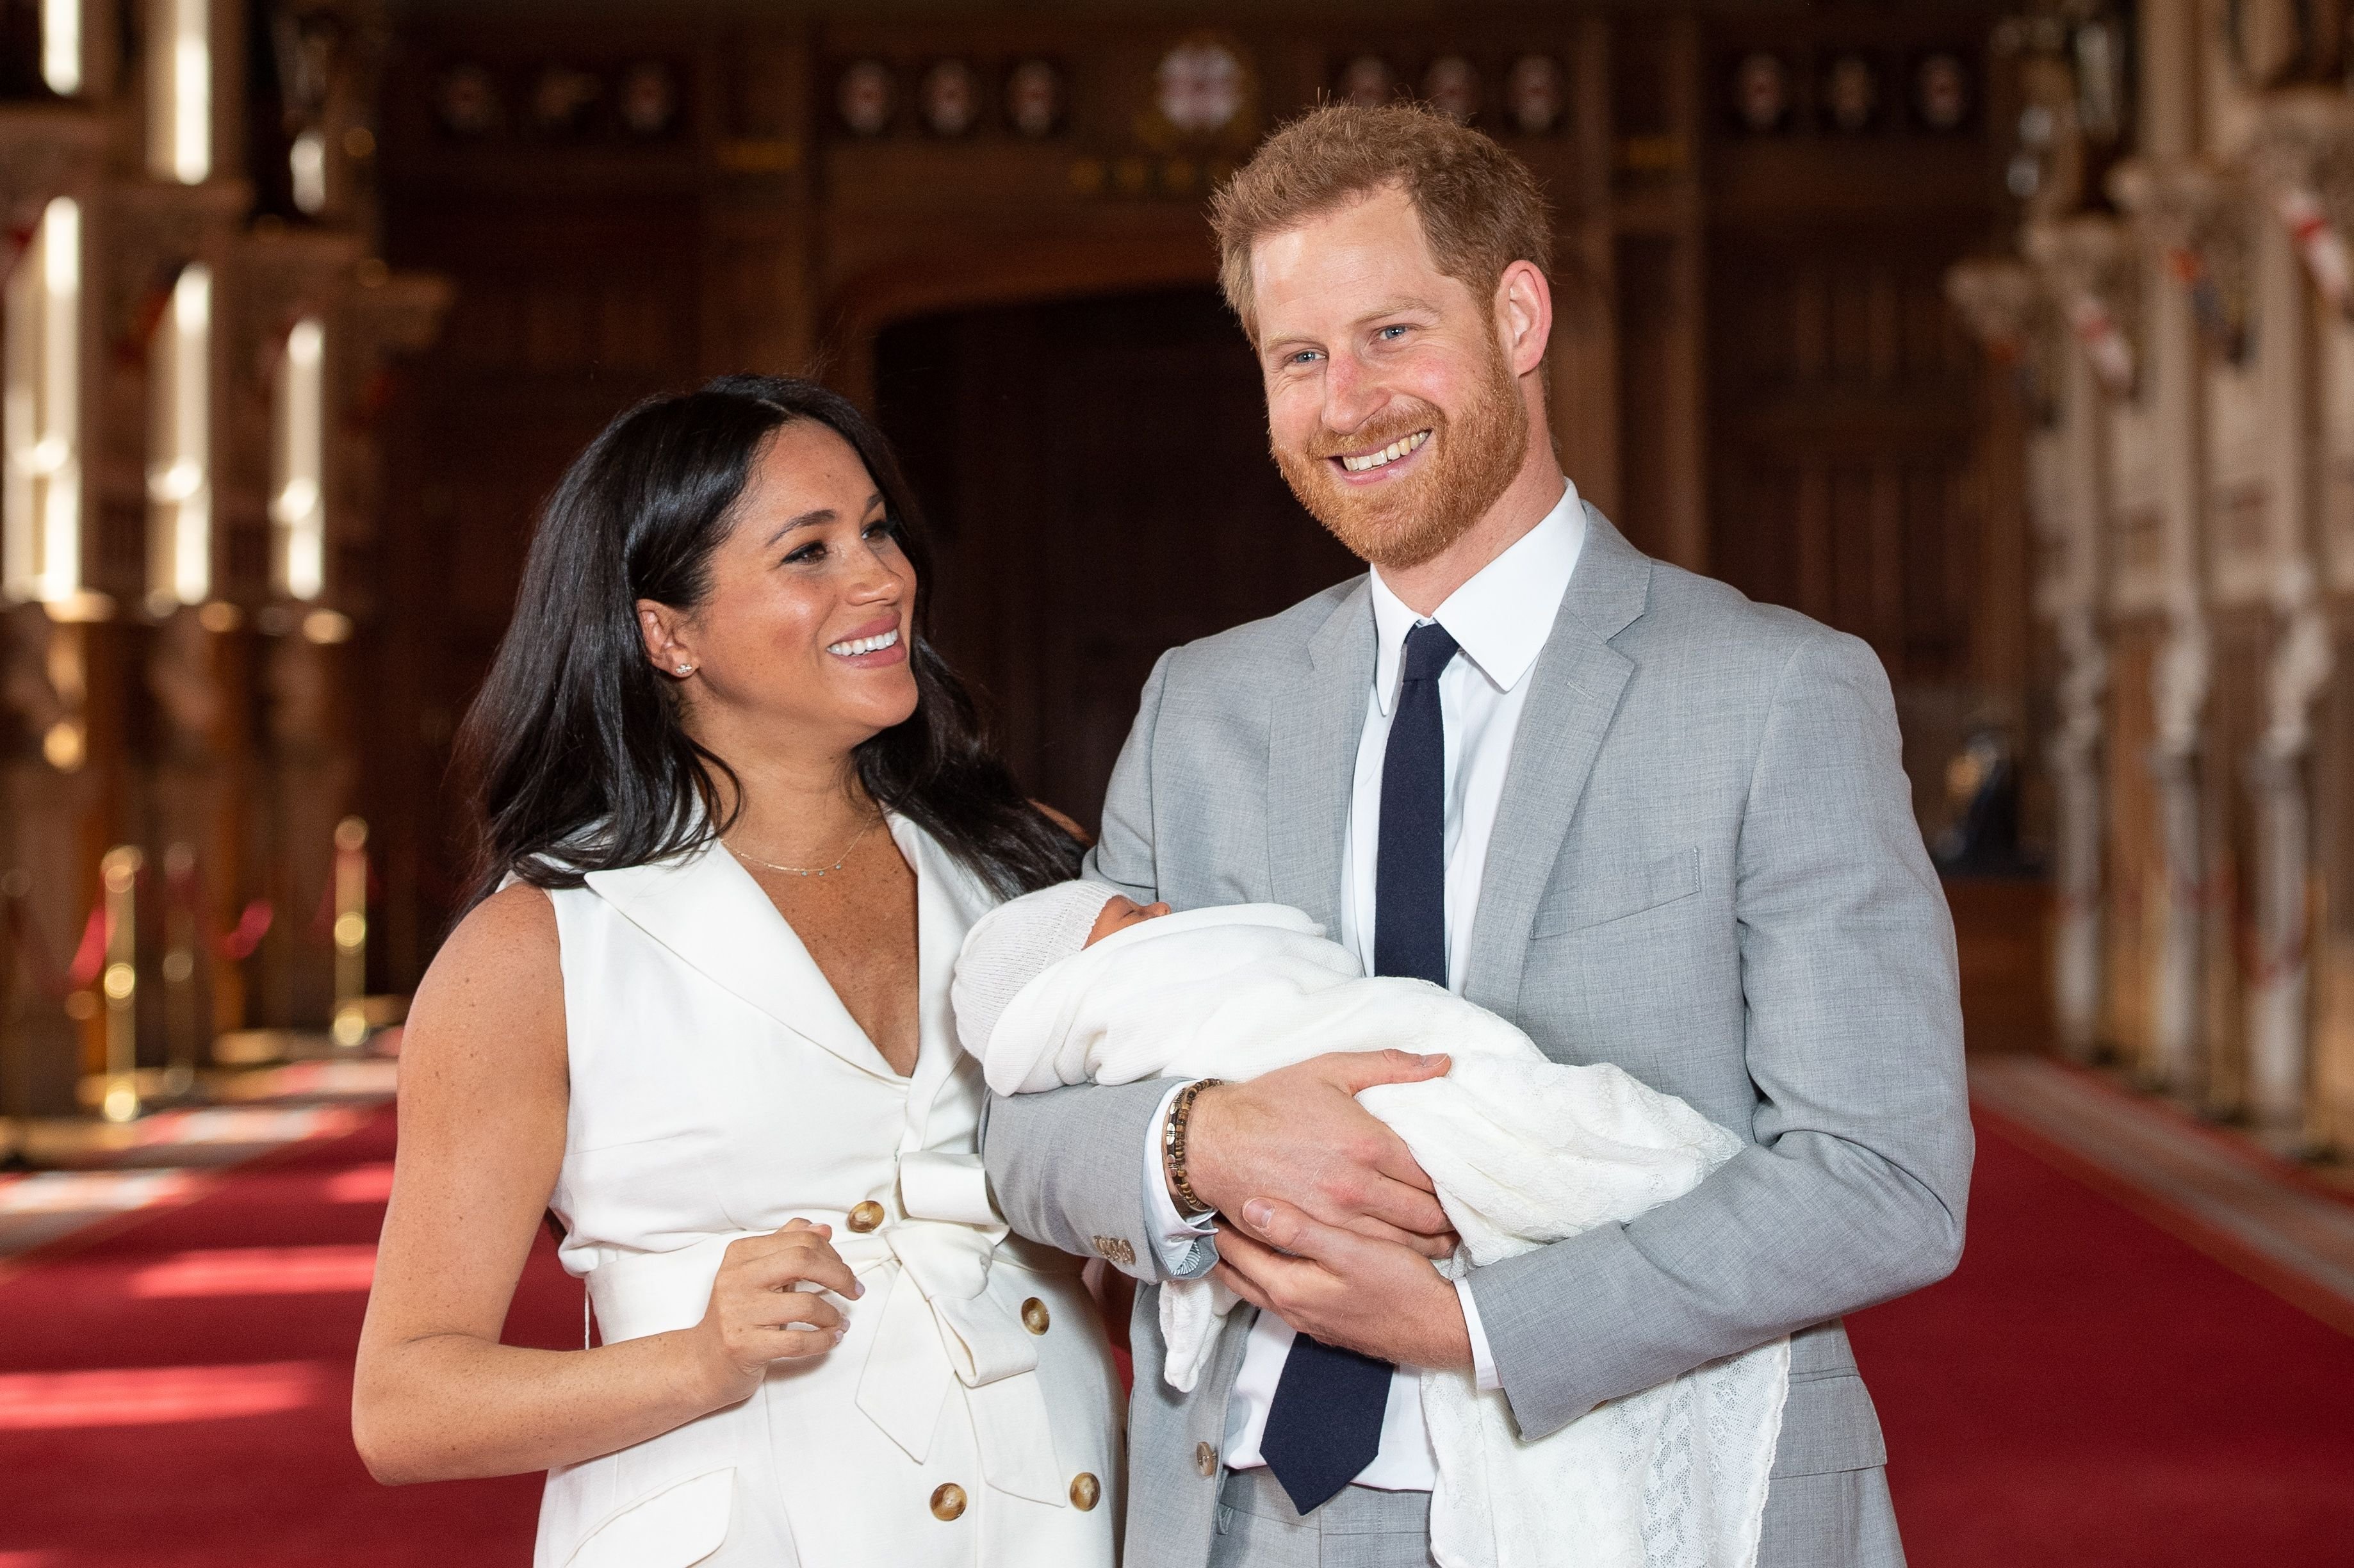 Meghan Markle and Prince Harry with their child at Windsor Castle on May 8, 2019 in Windsor, England | Photo: Getty Images